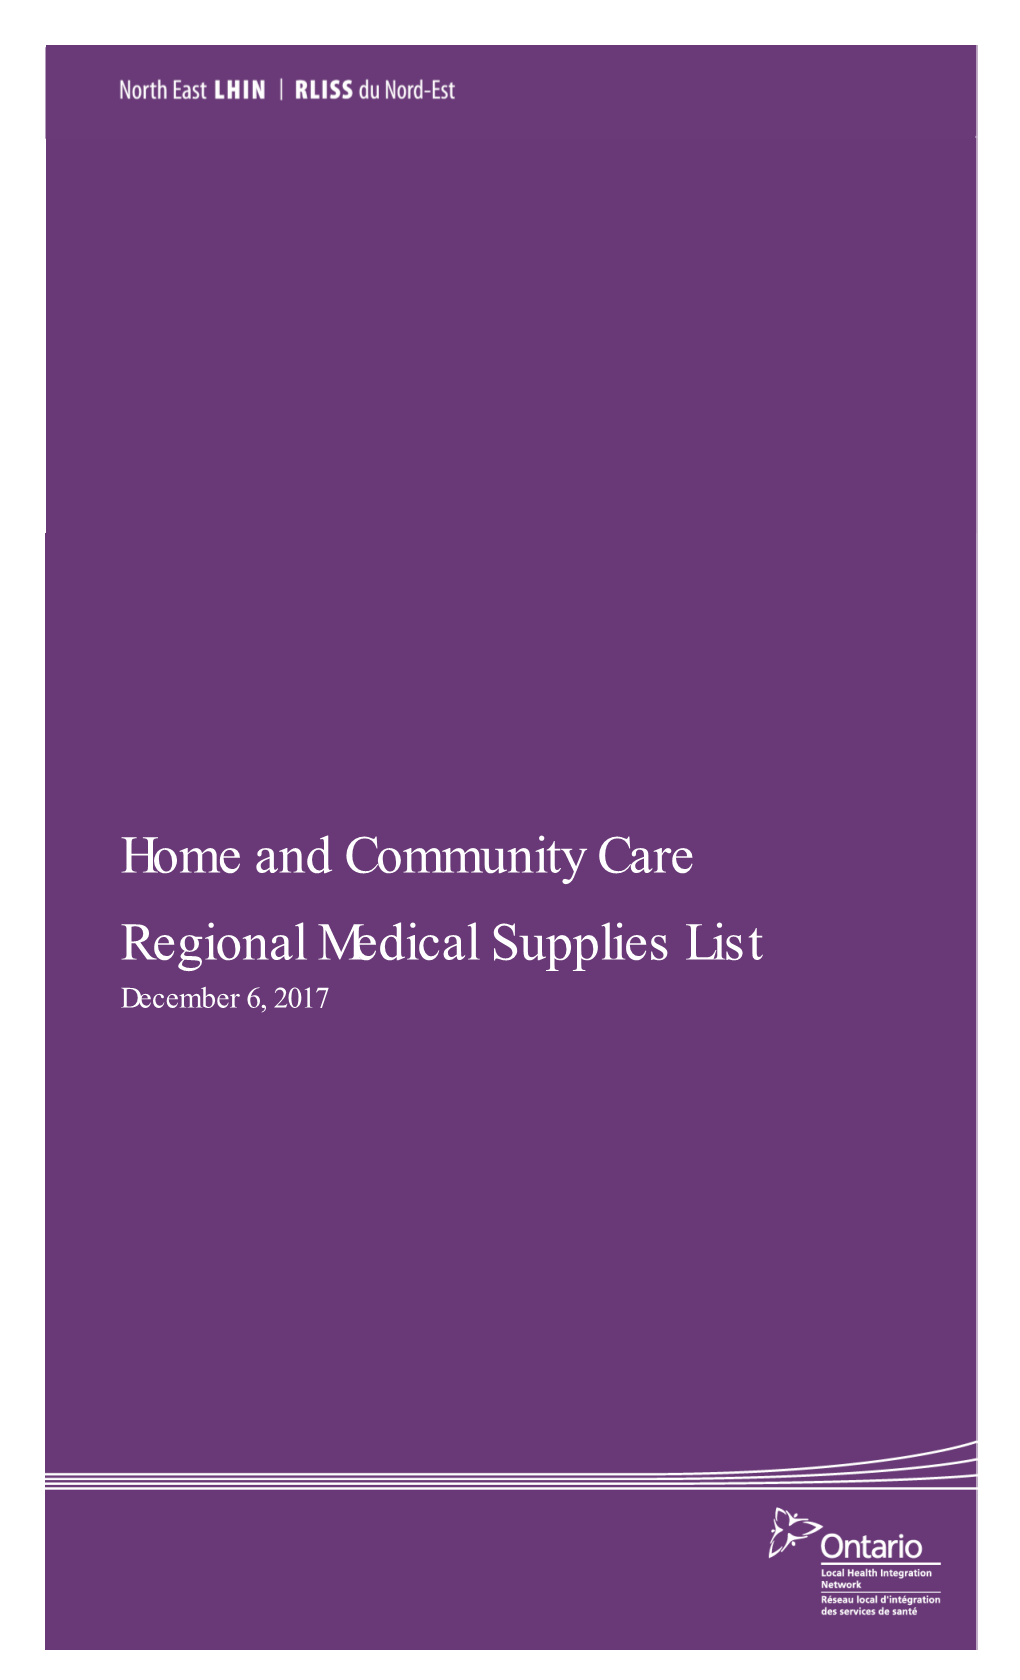 Home and Community Care Regional Medical Supplies List